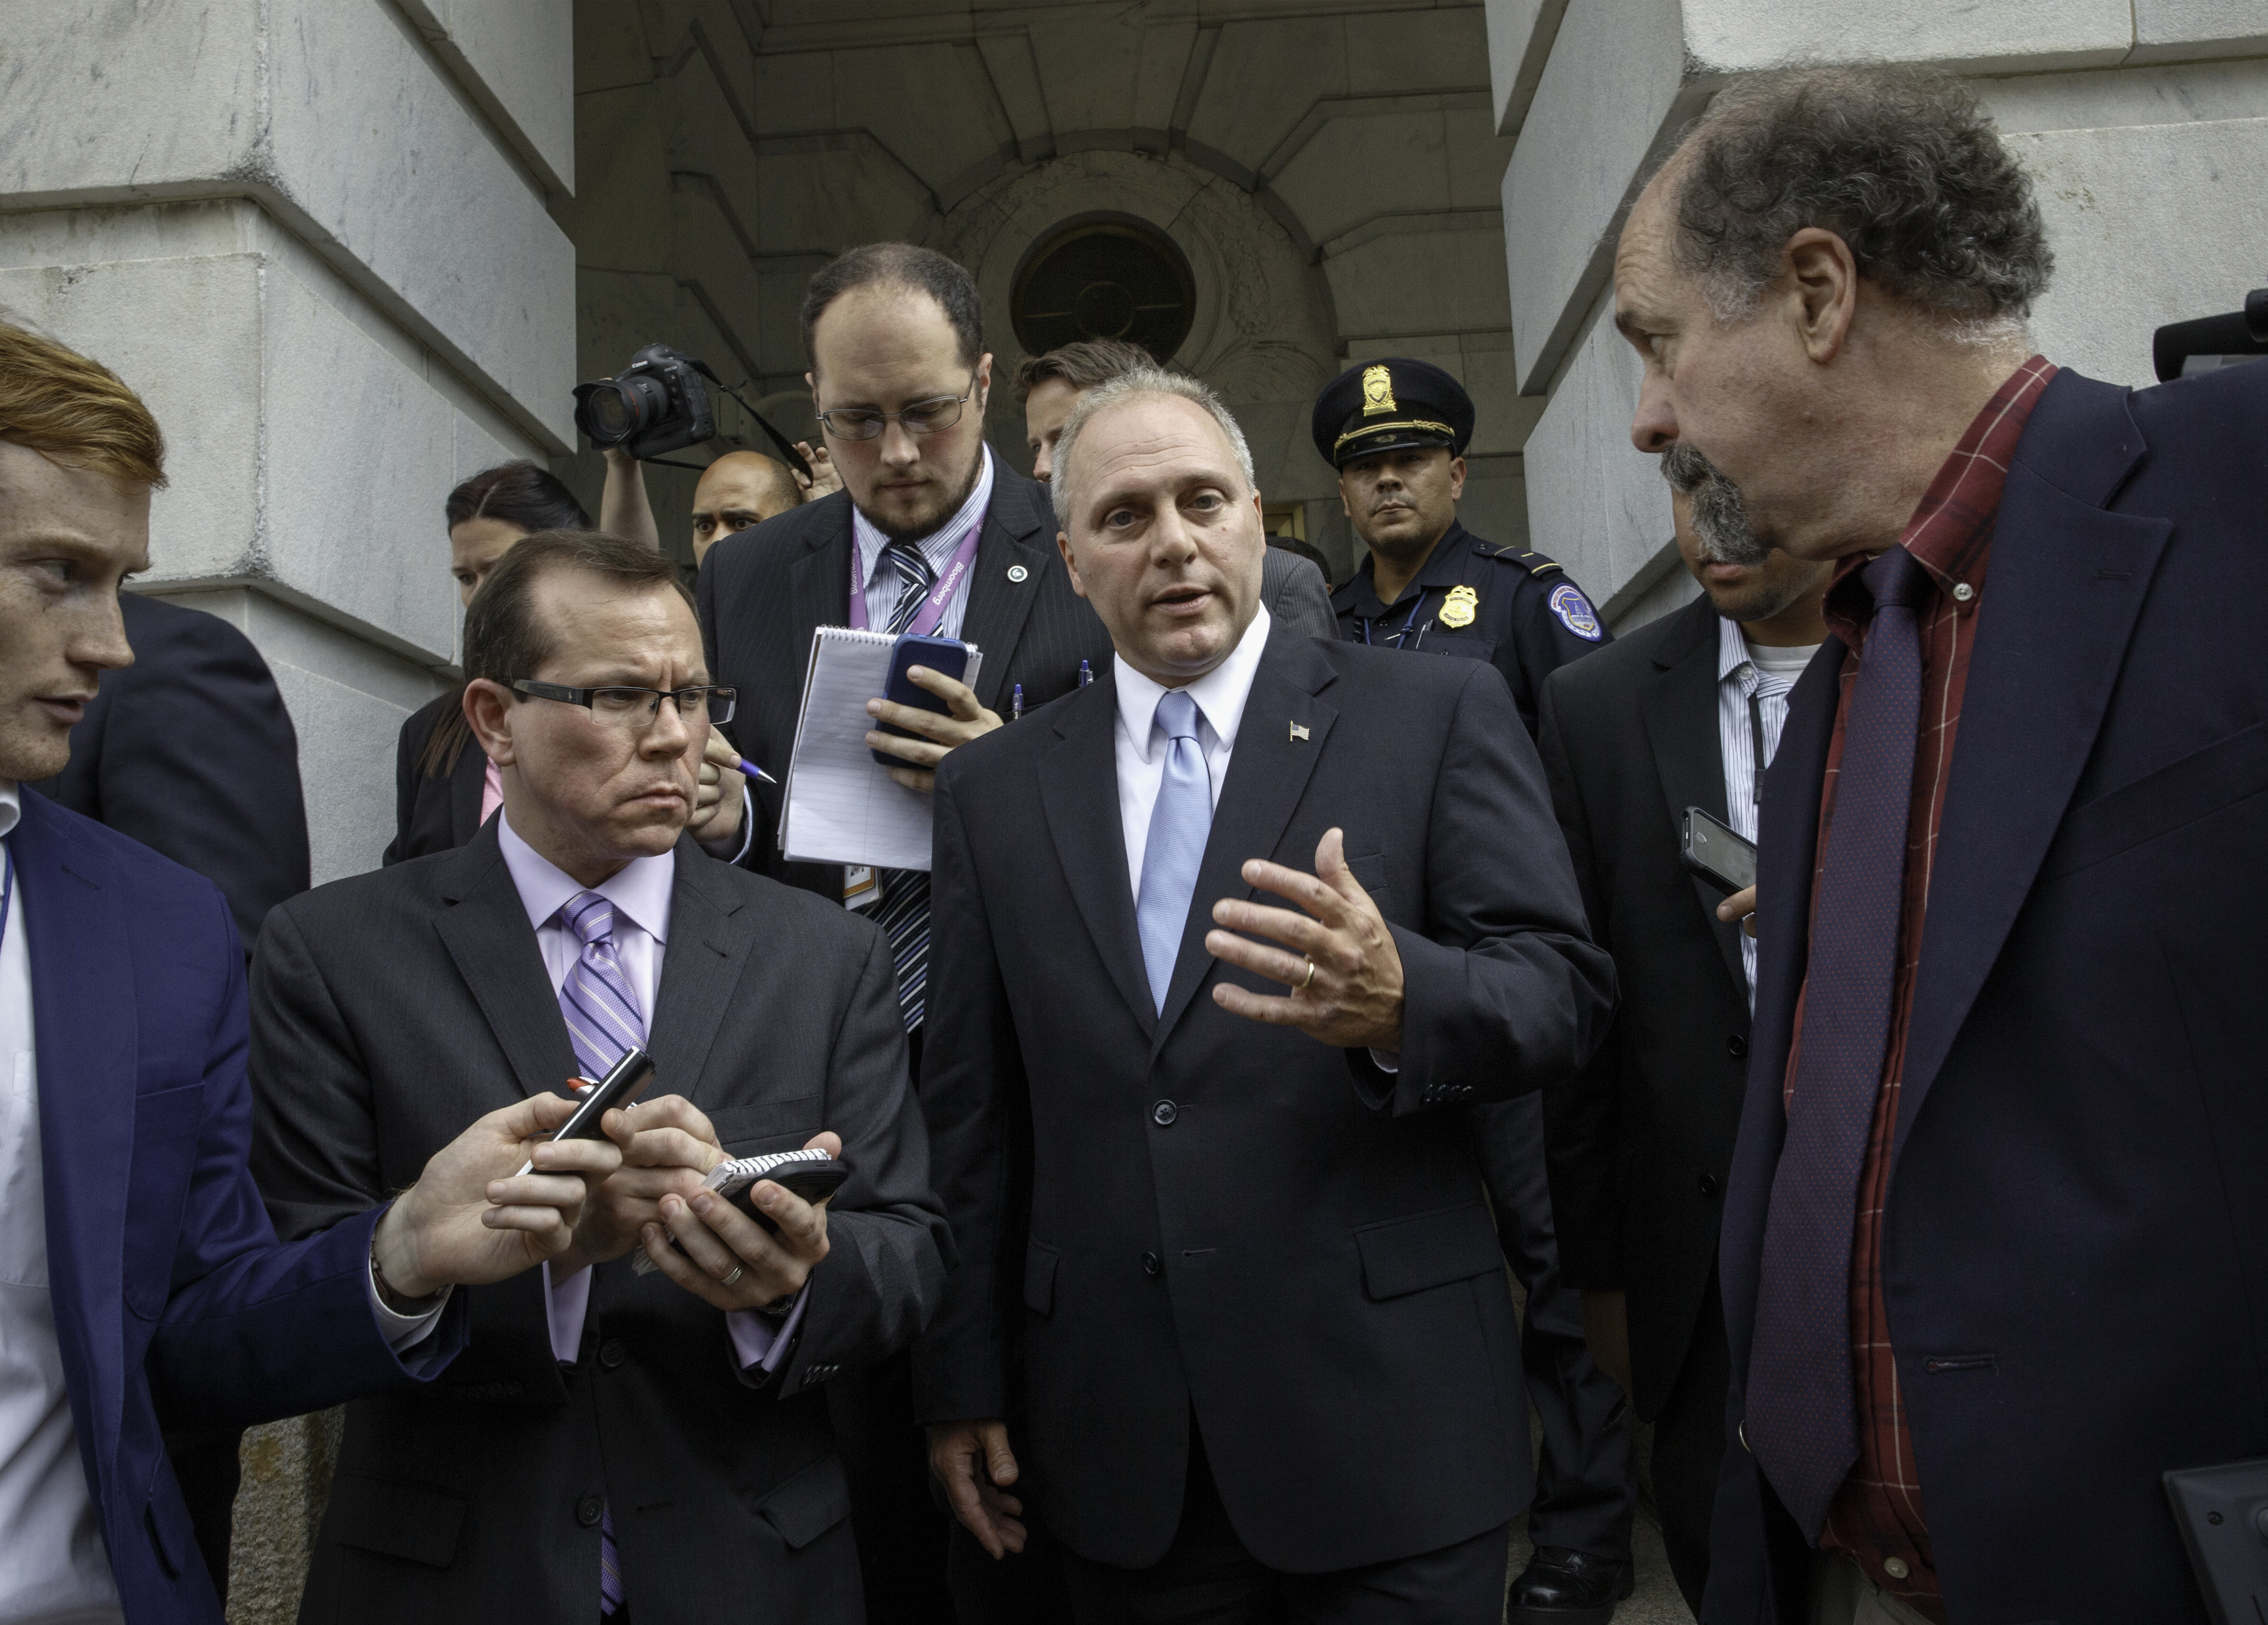 Rep. Steve Scalise, R-La., who leads a conservative faction of lawmakers in the Republican Study Committee, speaks with reporters on Capitol Hill in Washington, Thursday, June 19, 2014, after the House Republican Conference elected him to be the new House majority whip. (J. Scott Applewhite—AP)